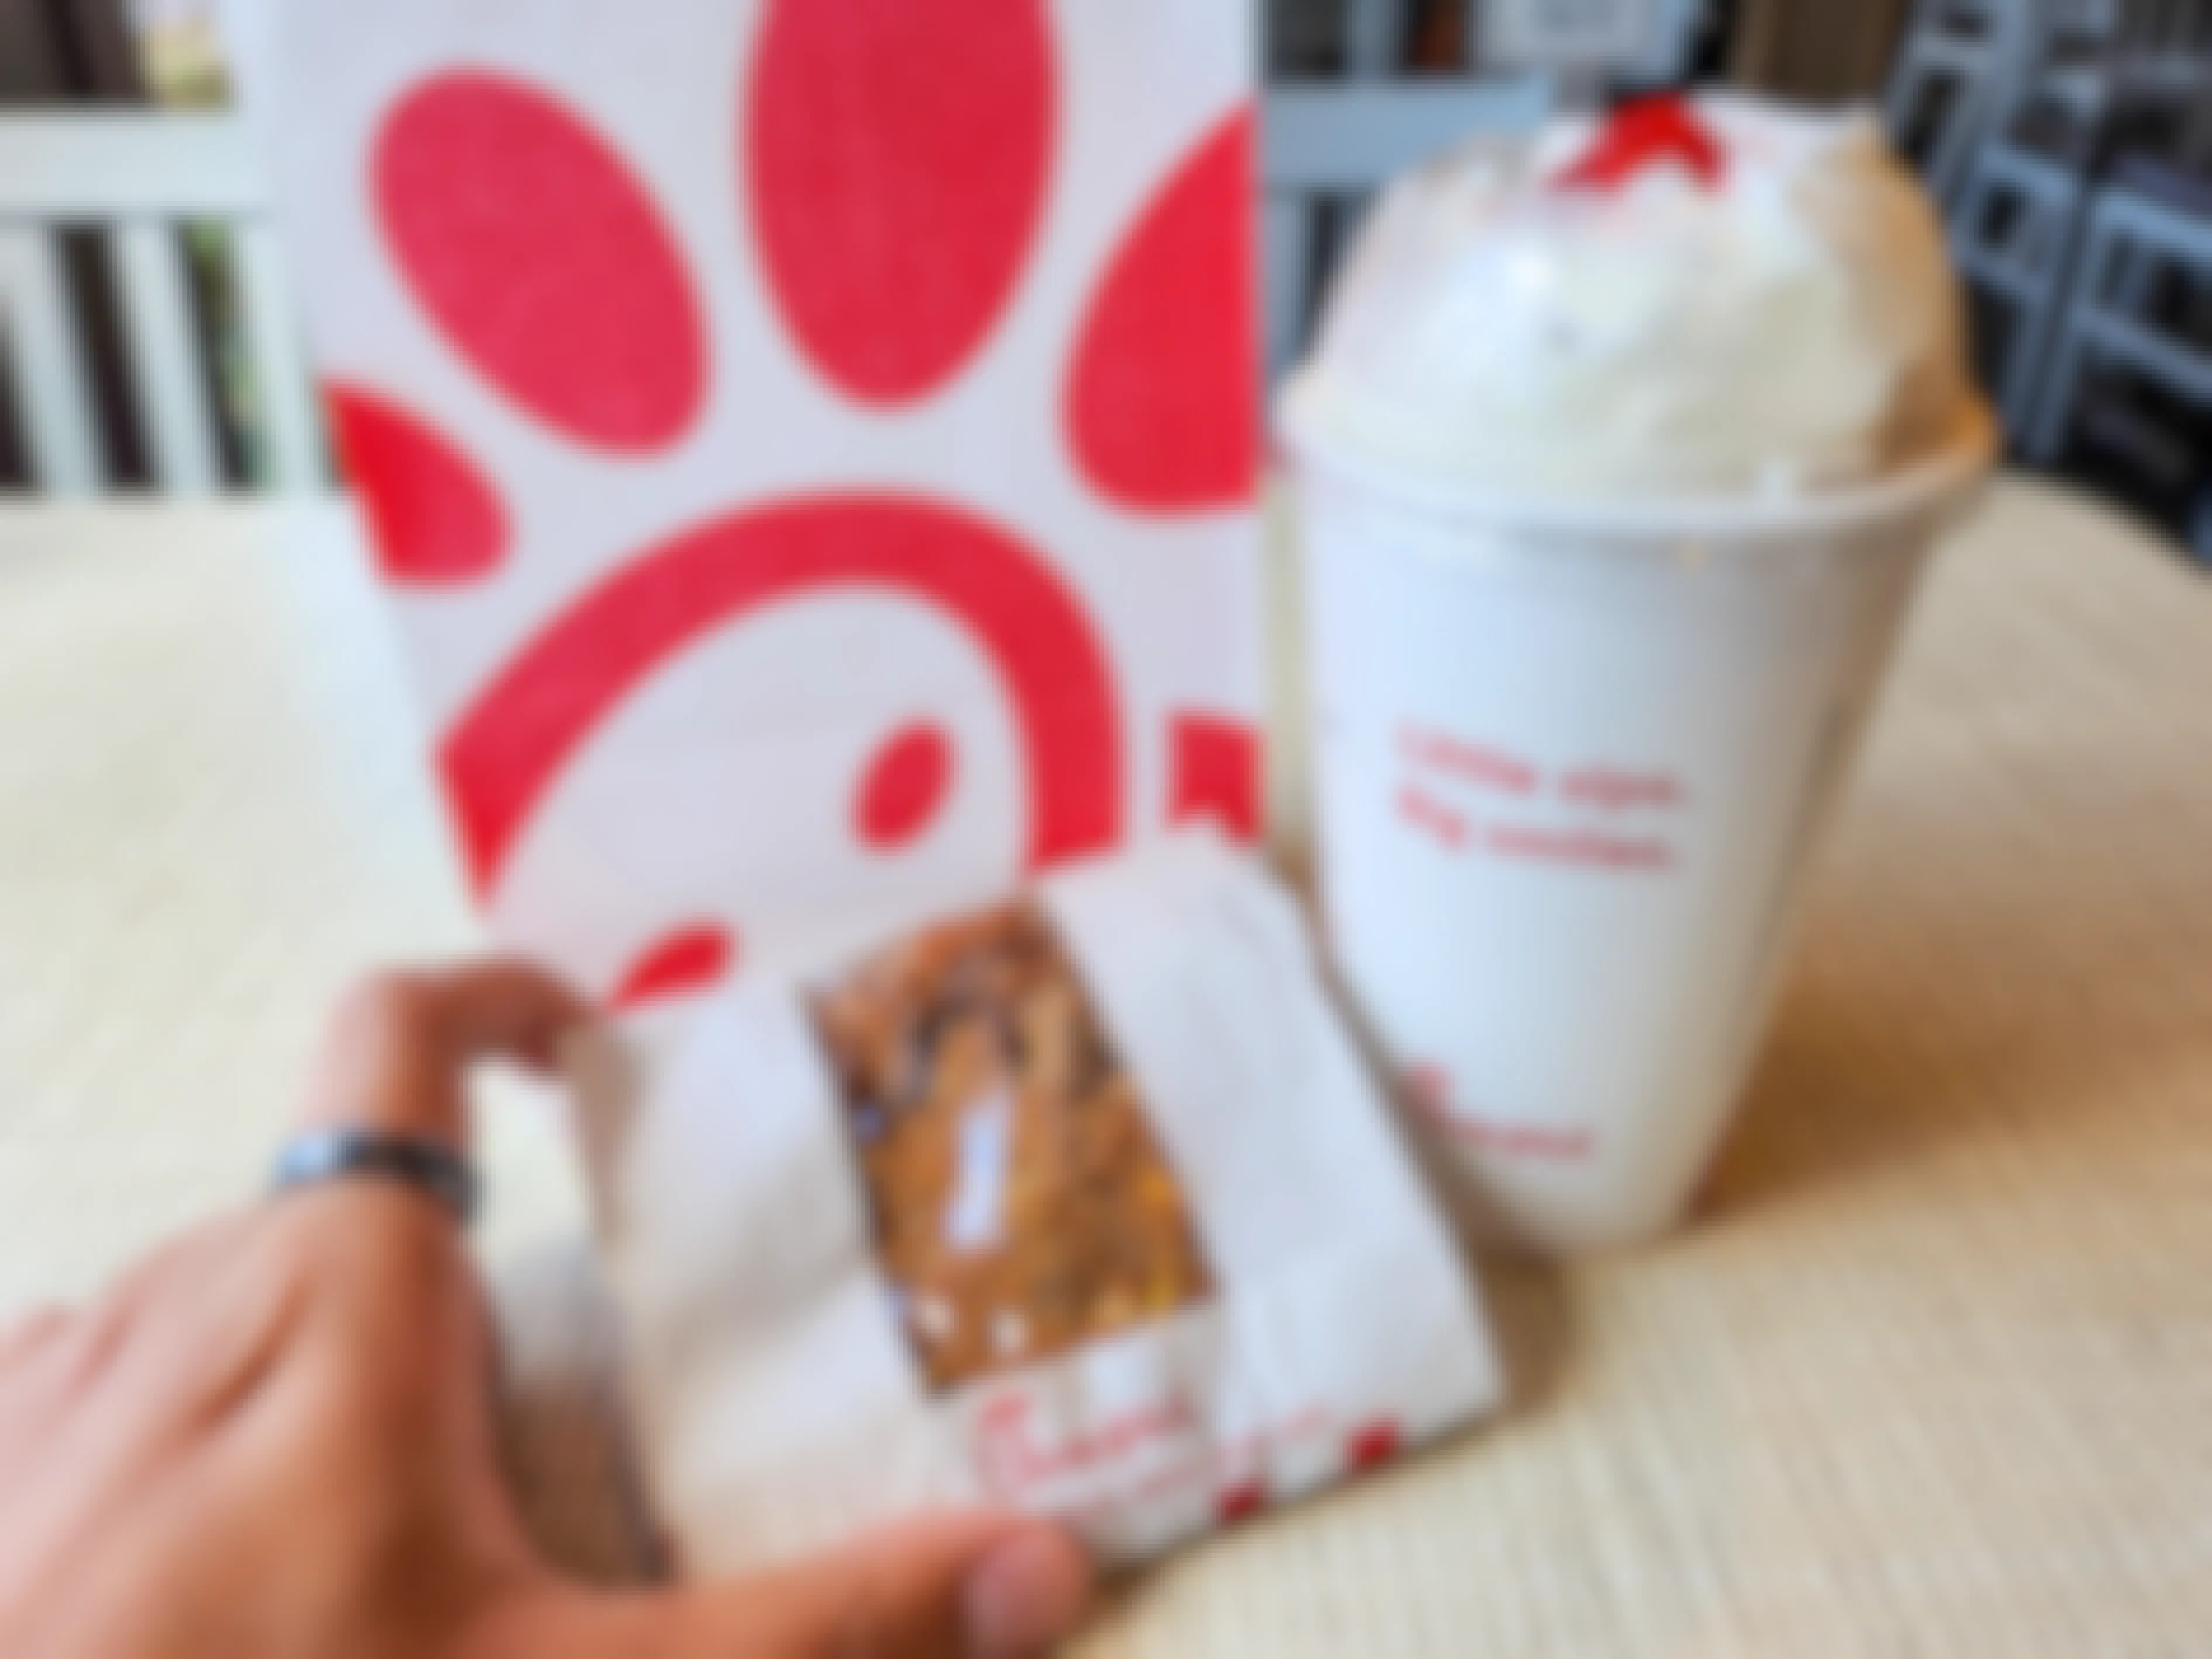 A person's hand picking up a Chick-fil-a cookie from a table next to a milkshake and bag.